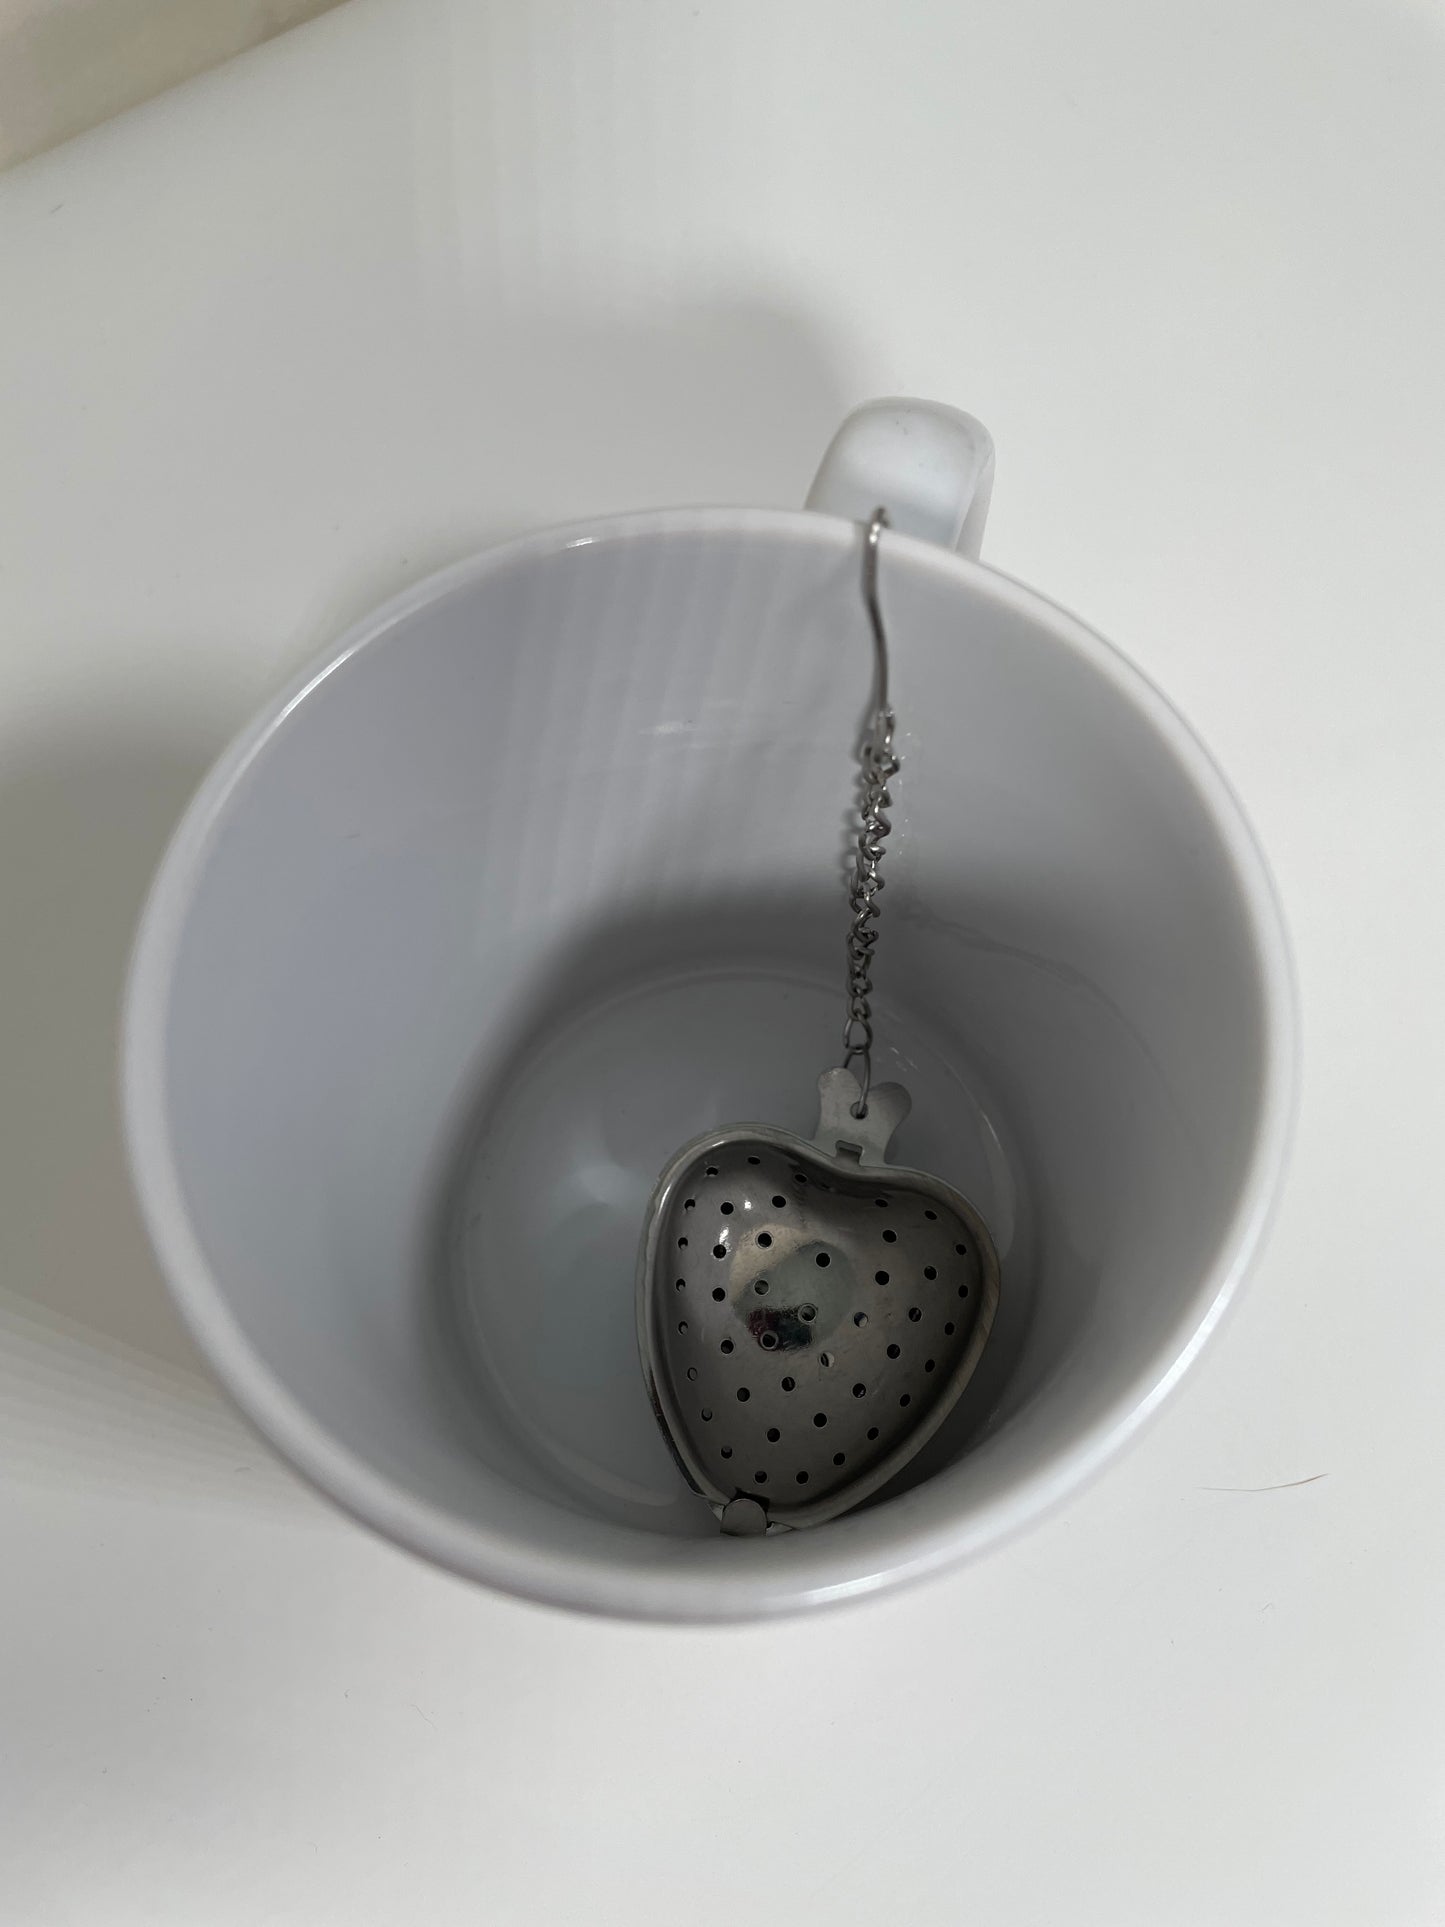 Witchy Pooh's Tea Infuser Heart Shaped Tea Strainer, Reusable for Single Cups